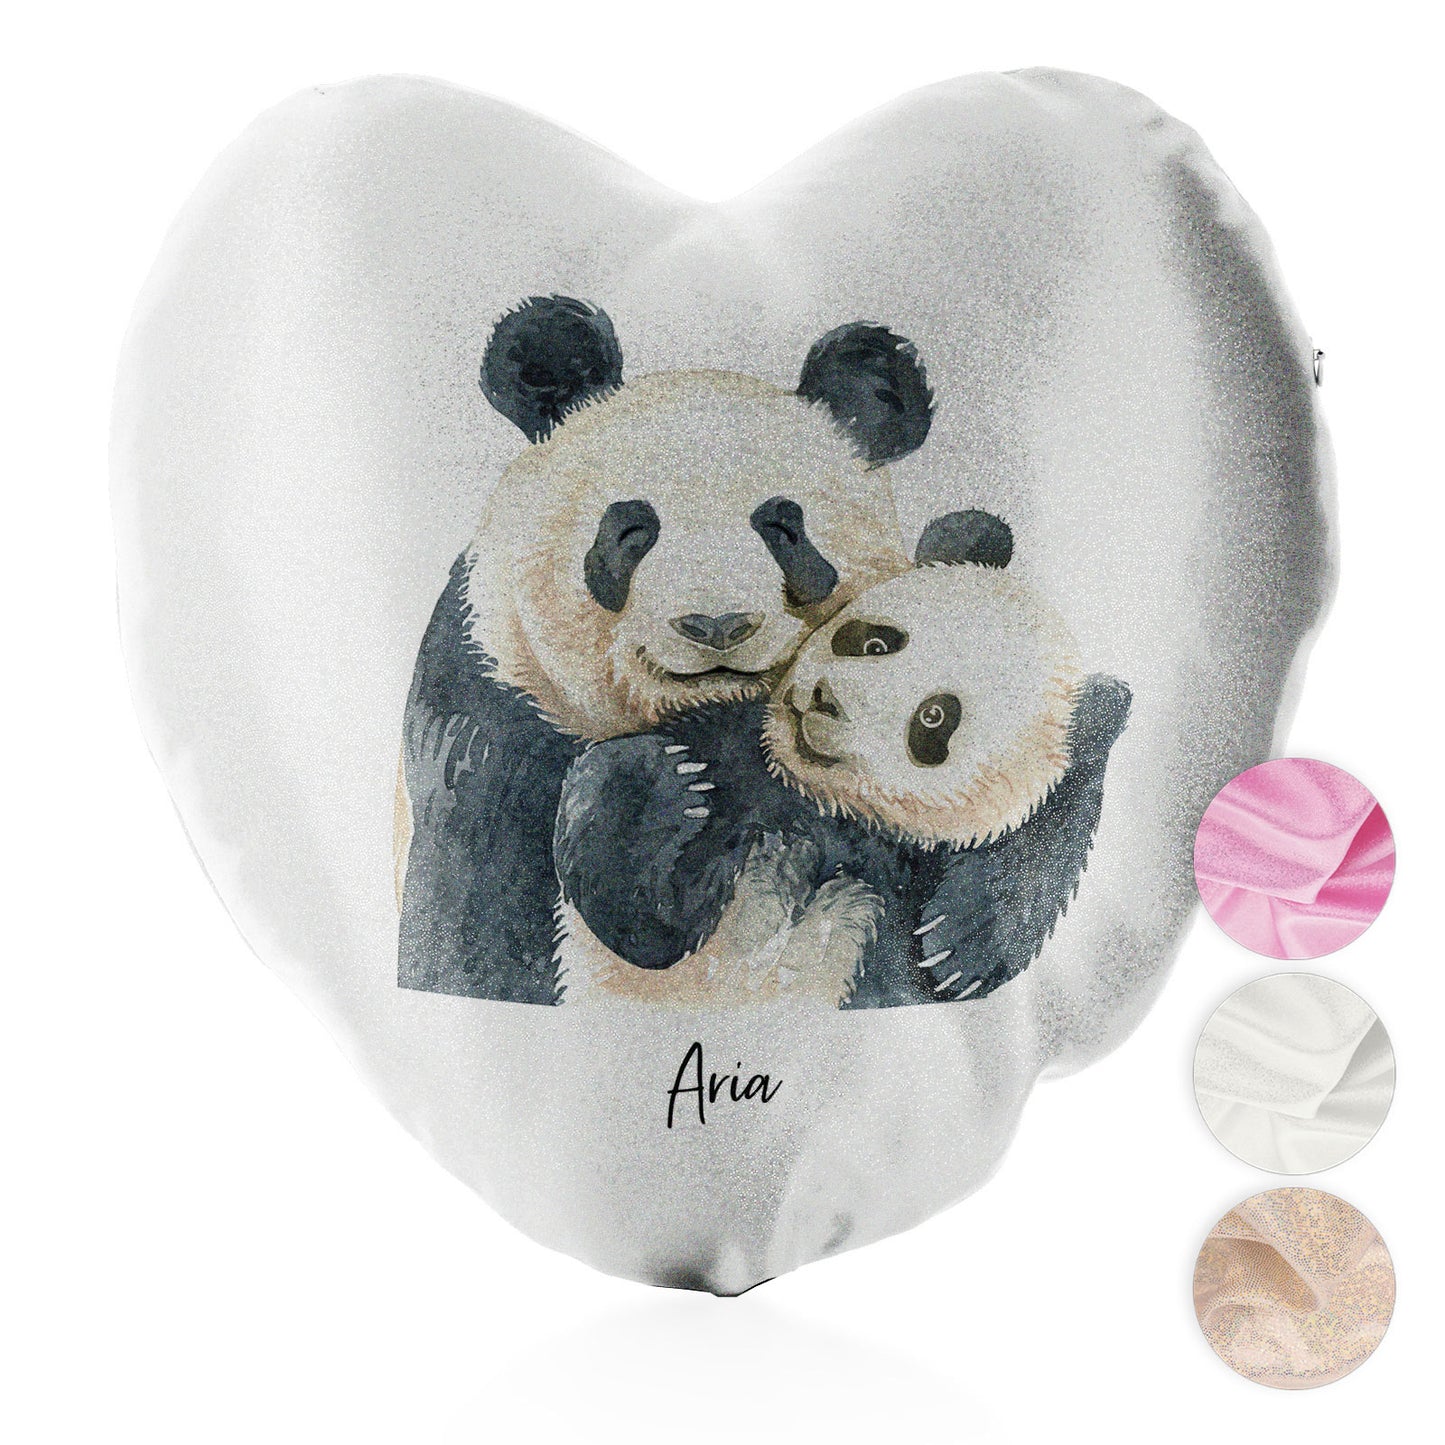 Personalised Glitter Heart Cushion with Welcoming Text and Embracing Mum and Baby Pandas